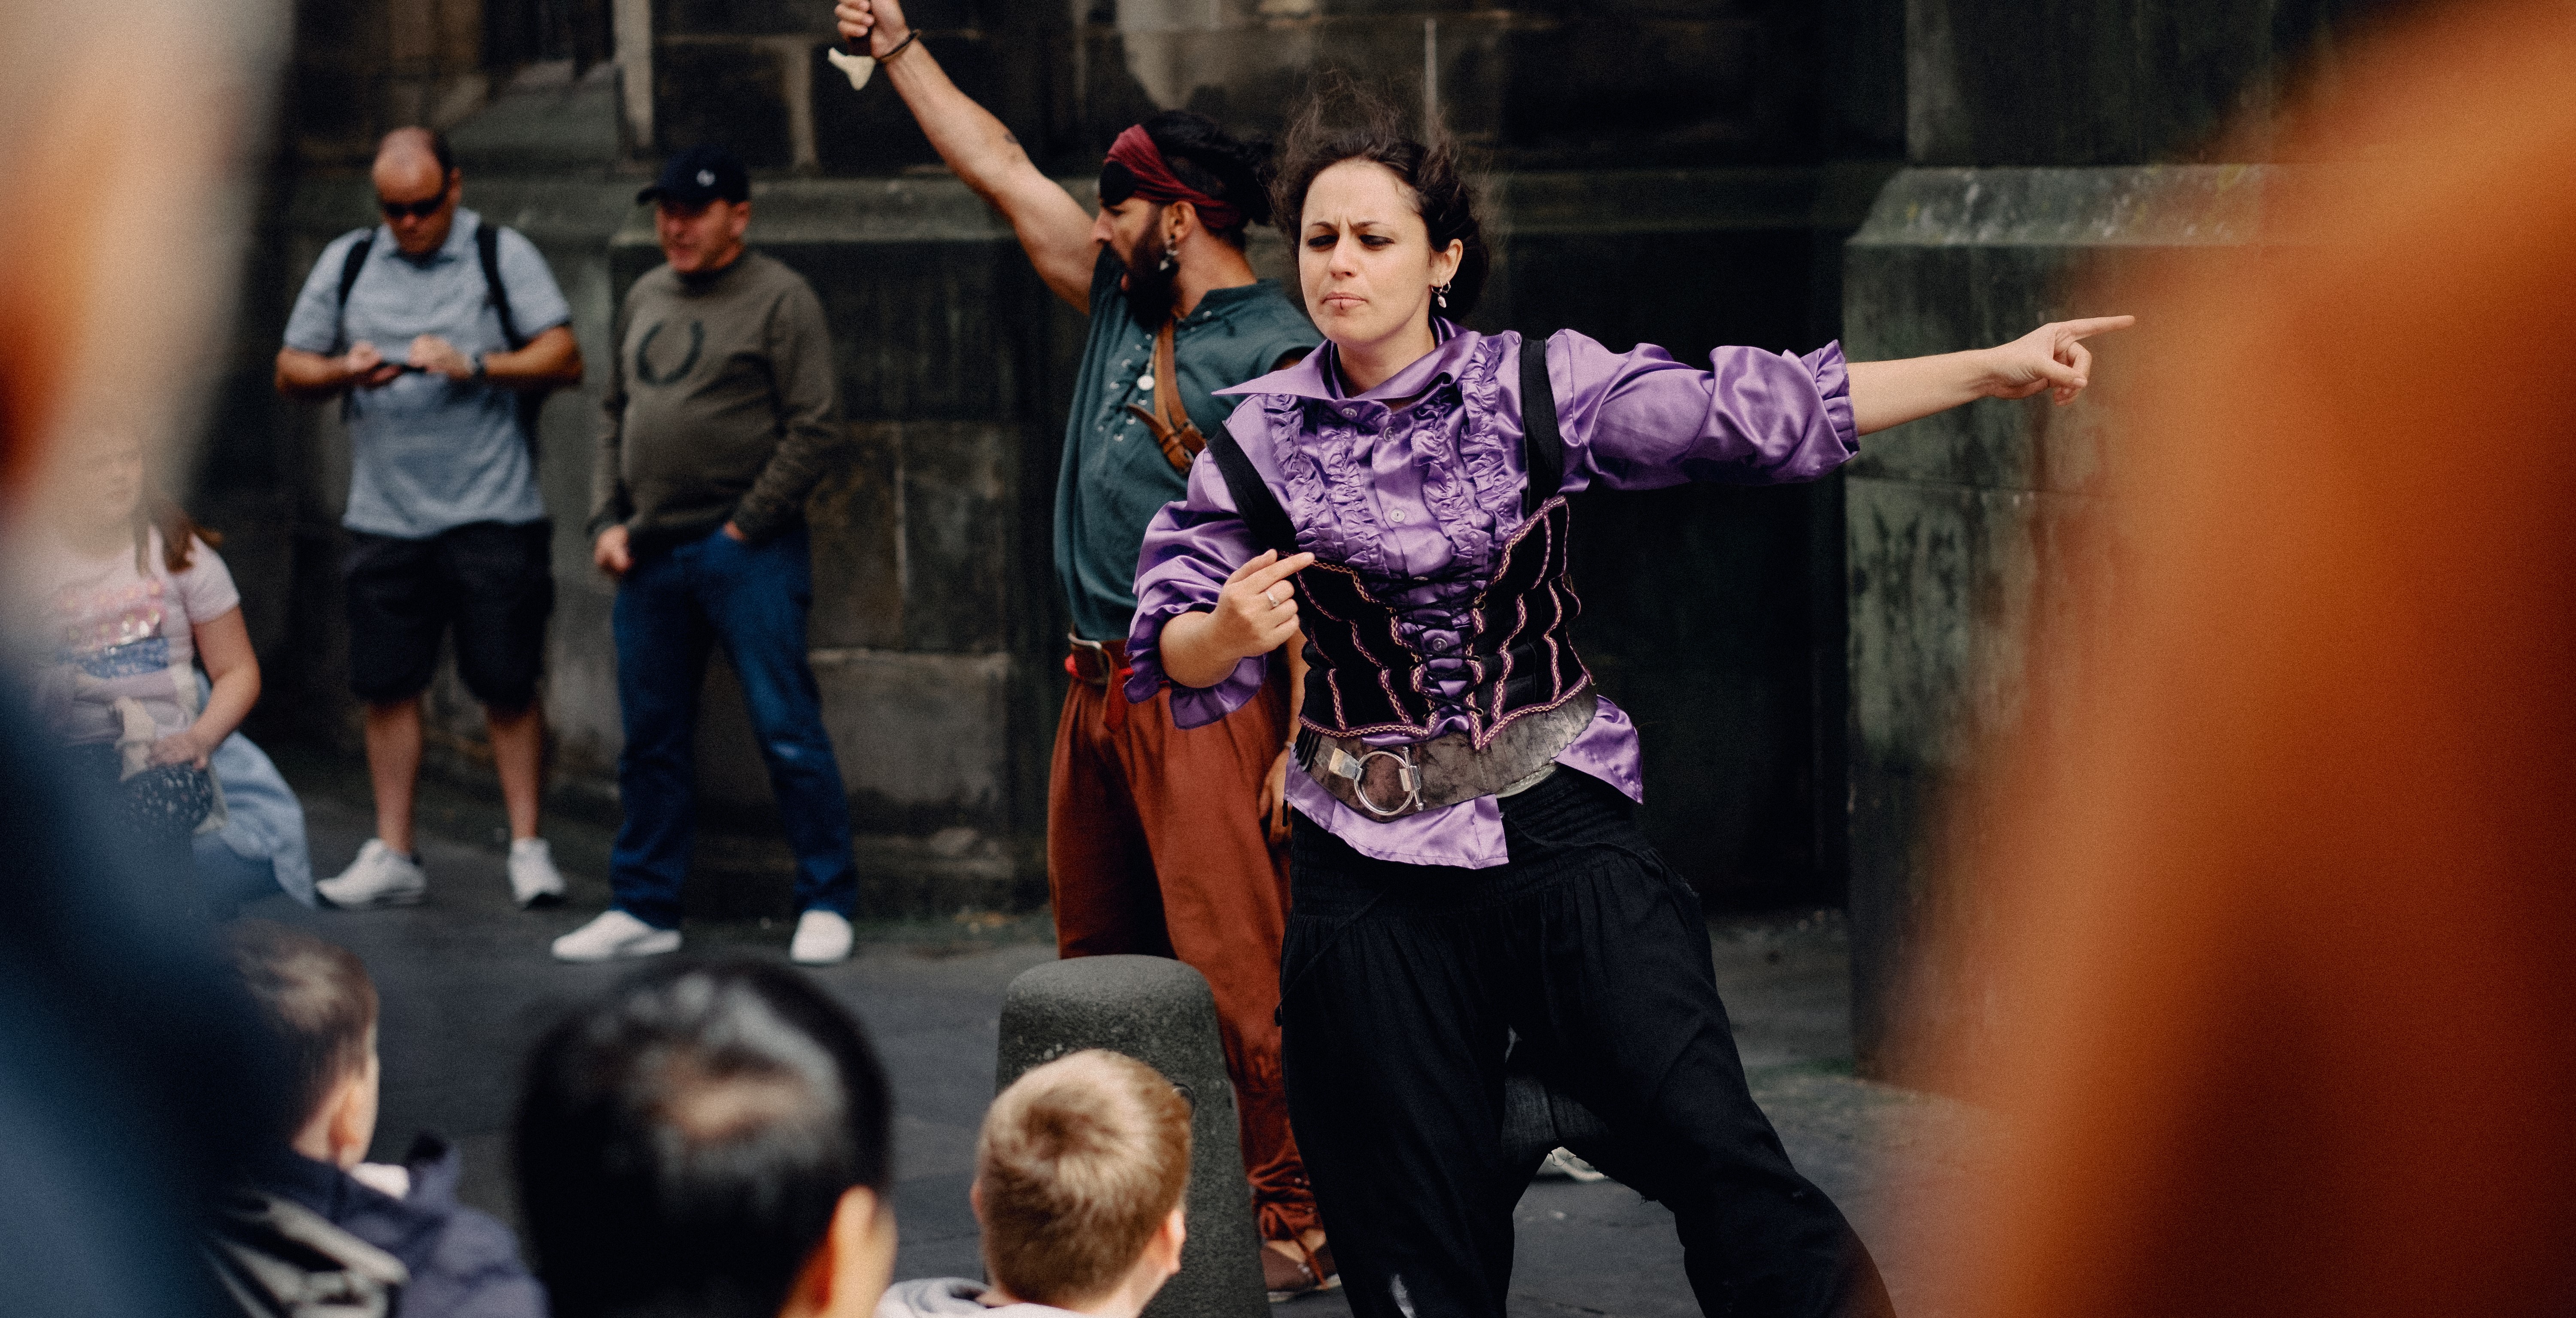 Photo shows man and women dressed as pirates while children watch on Edinburgh's Royal Mile